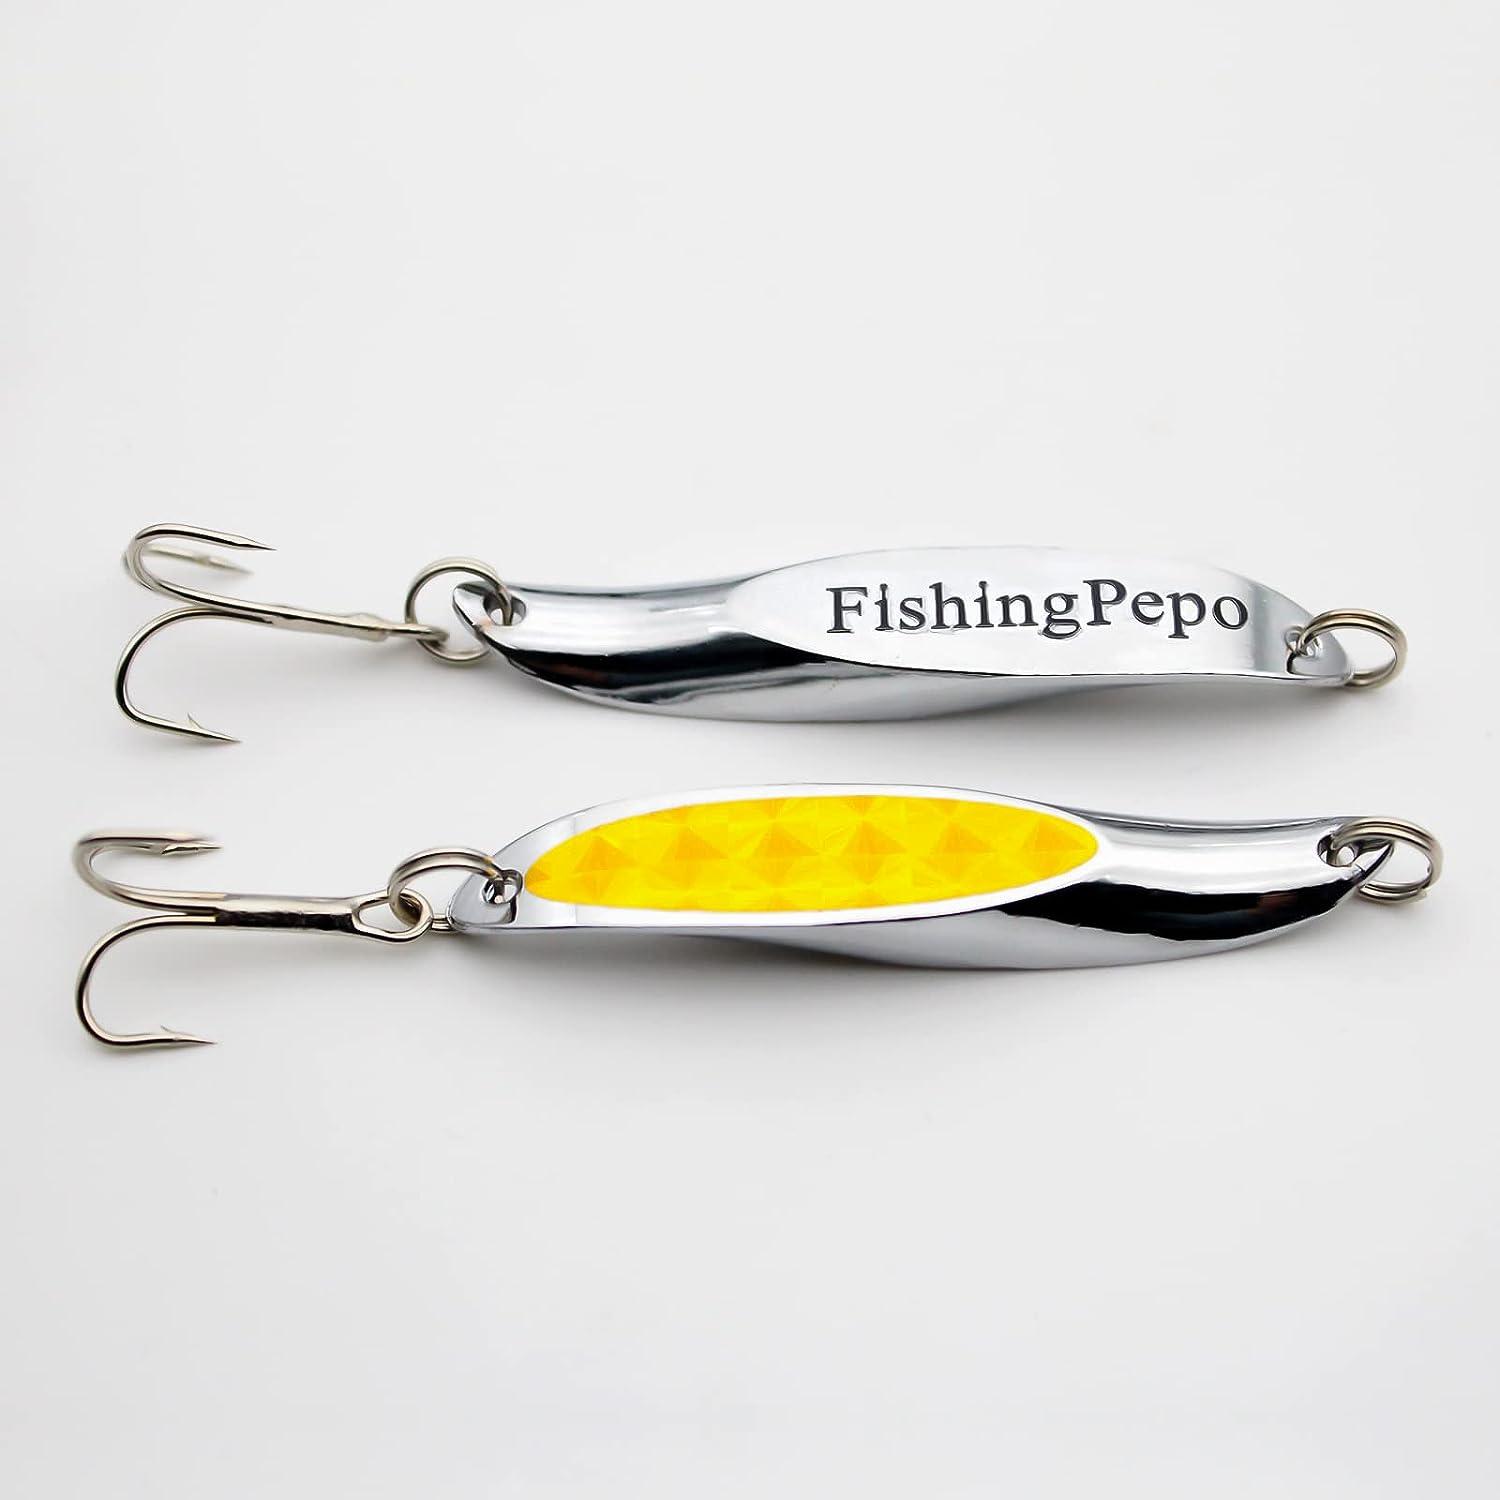 metal fishing lures, metal fishing lures Suppliers and Manufacturers at